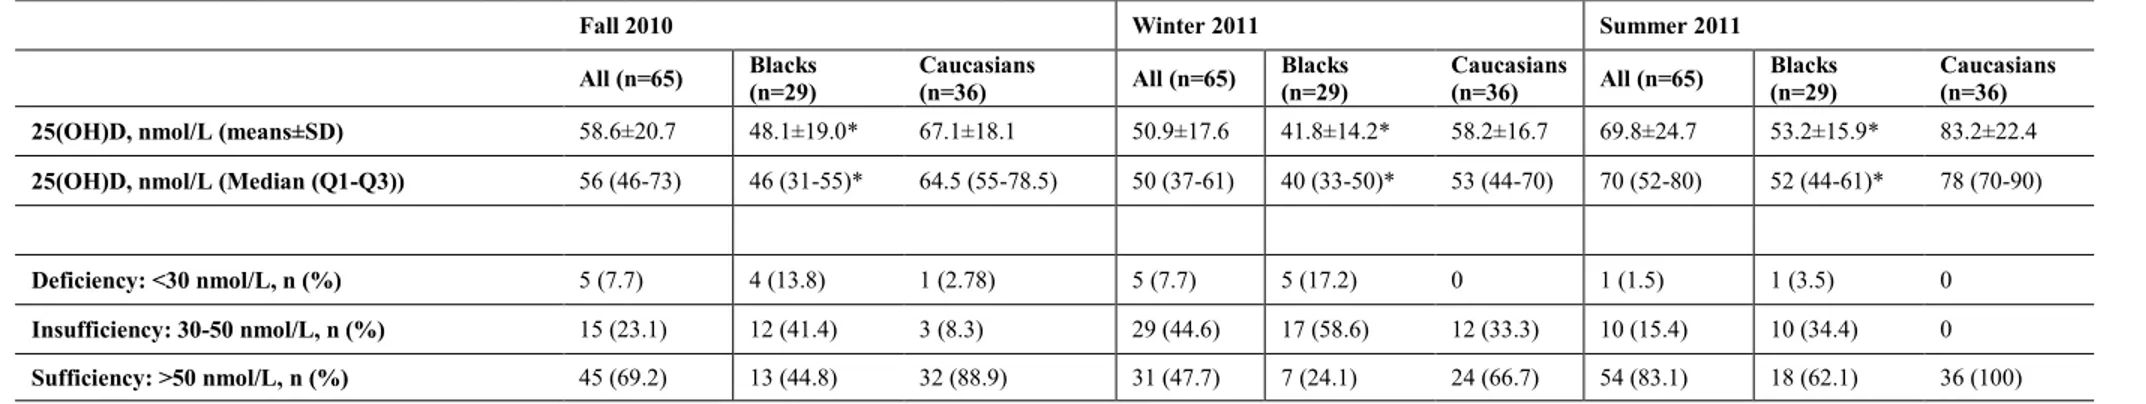 Table 2: Mean 25(OH)D concentration and proportion of participants at different thresholds by race and season 